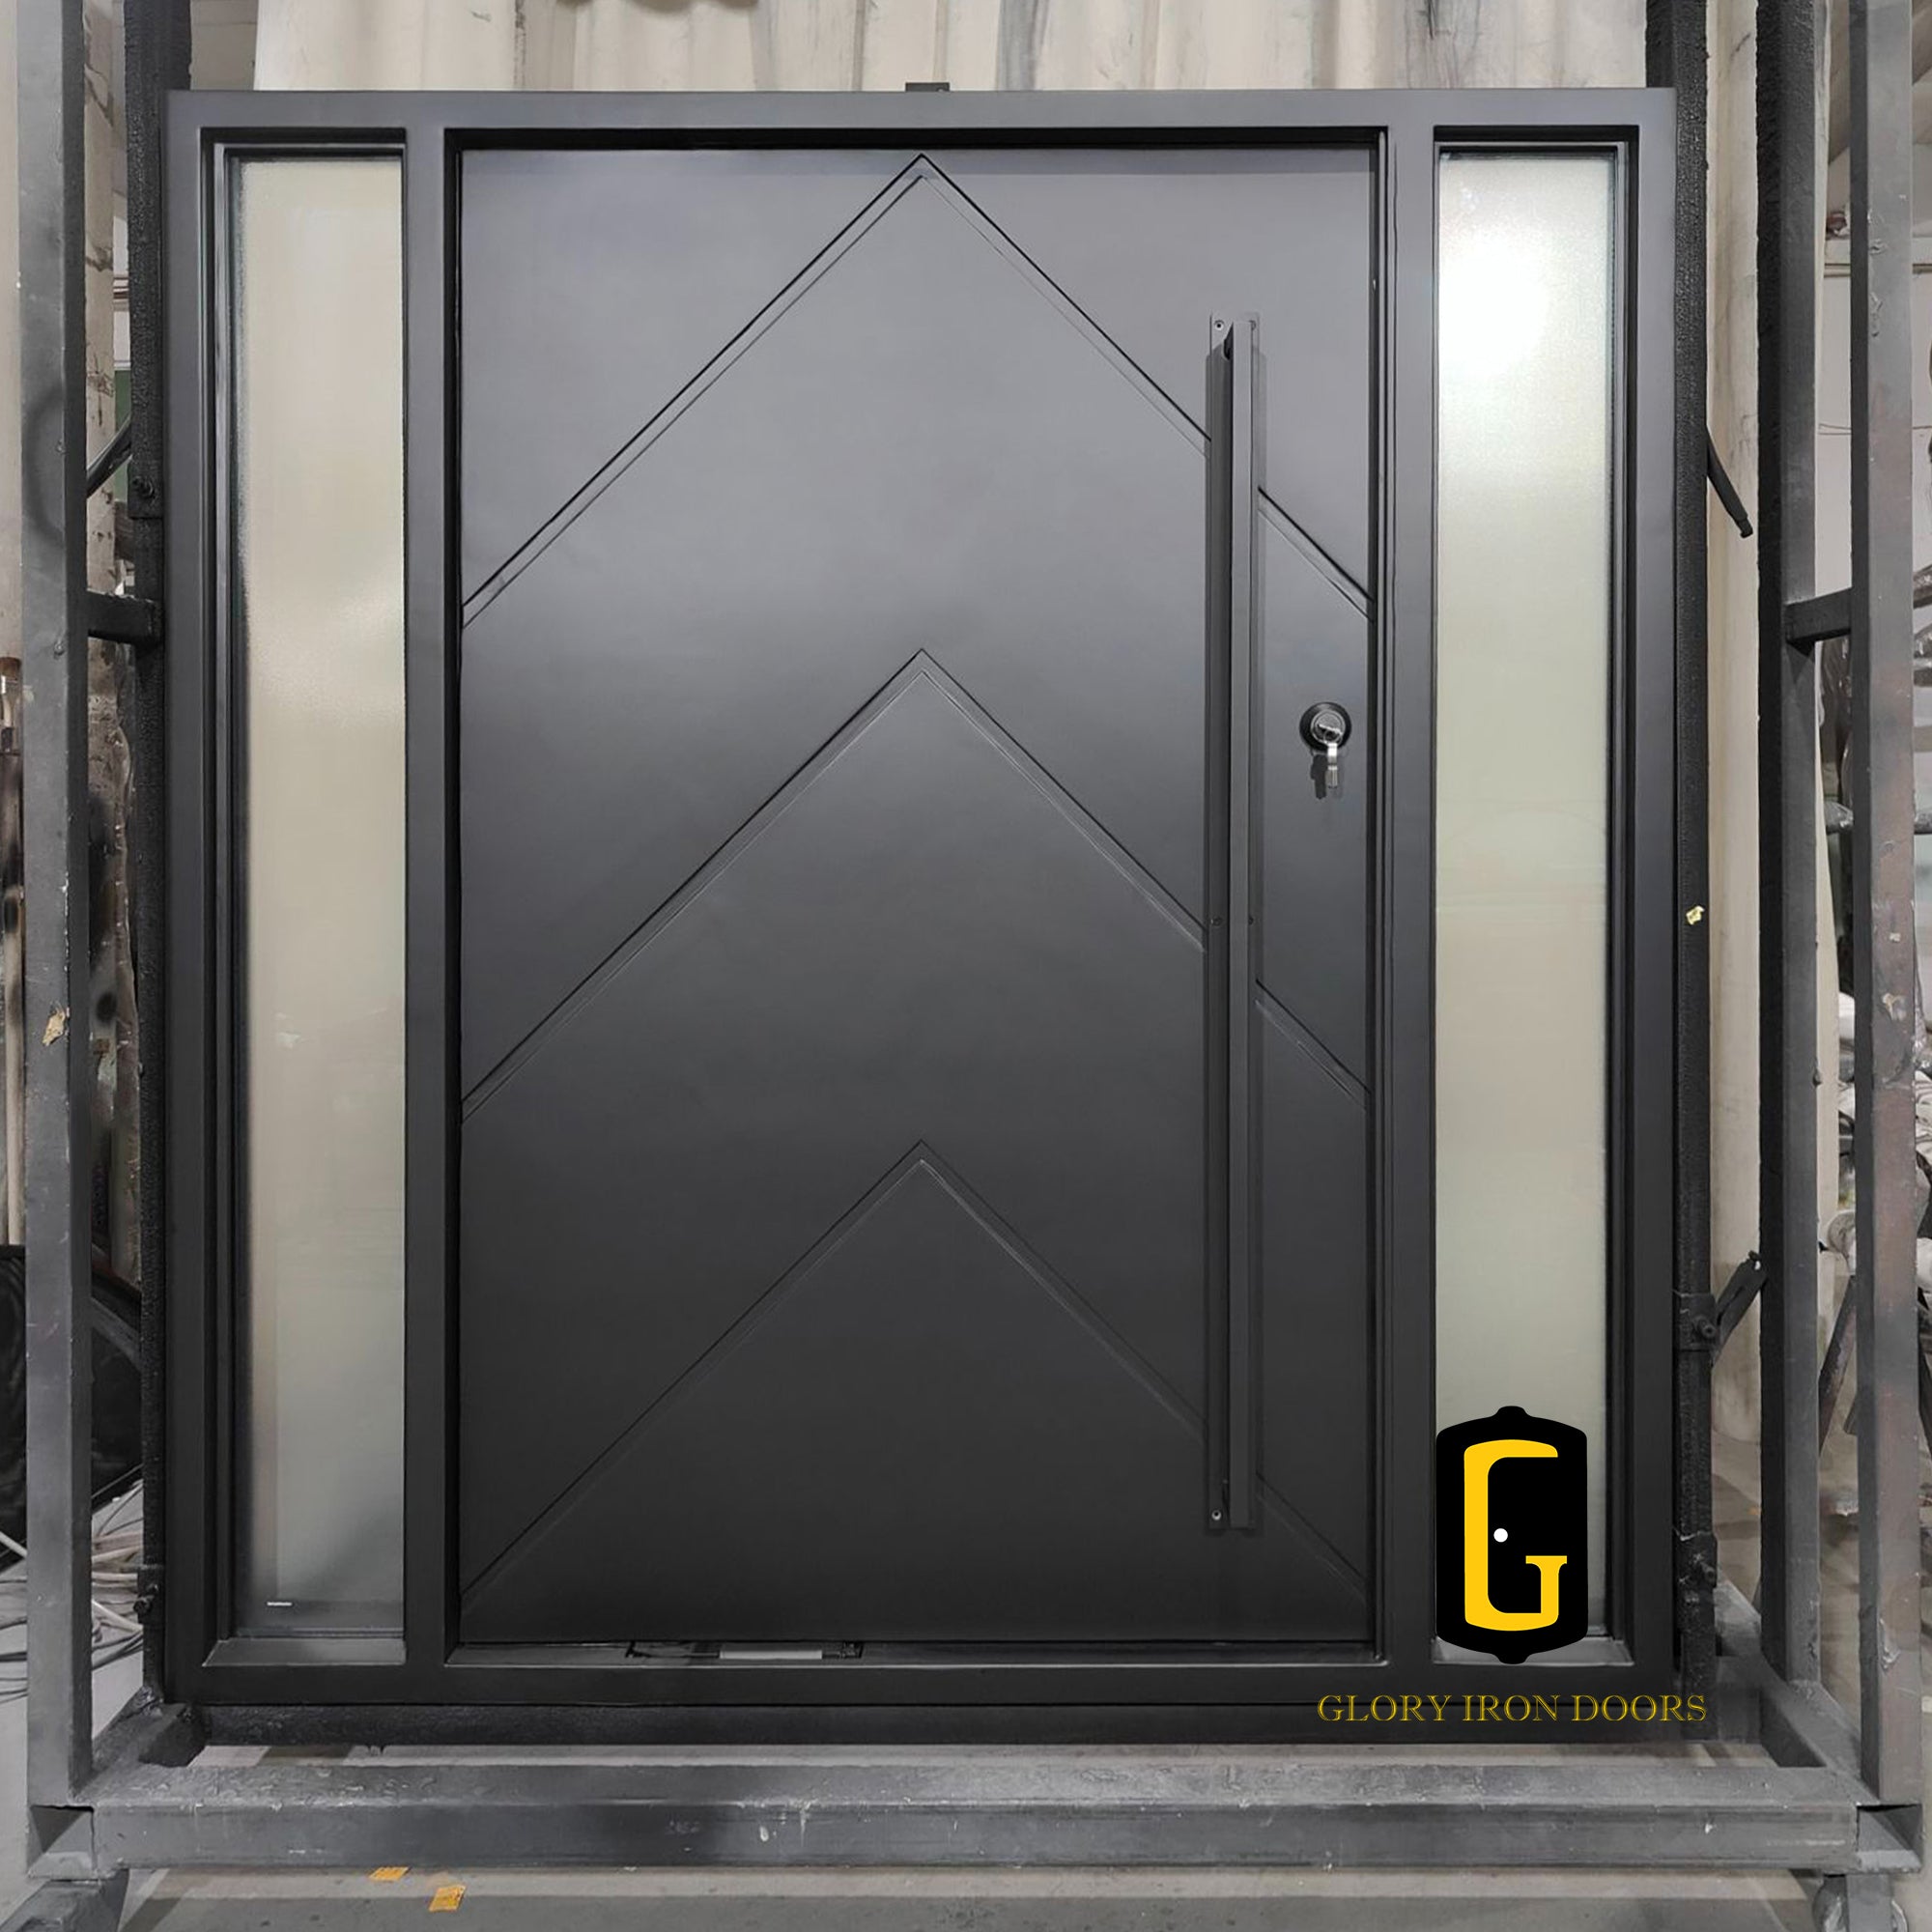 gid thermal break iron pivot single door with two sidelights and course linen glass